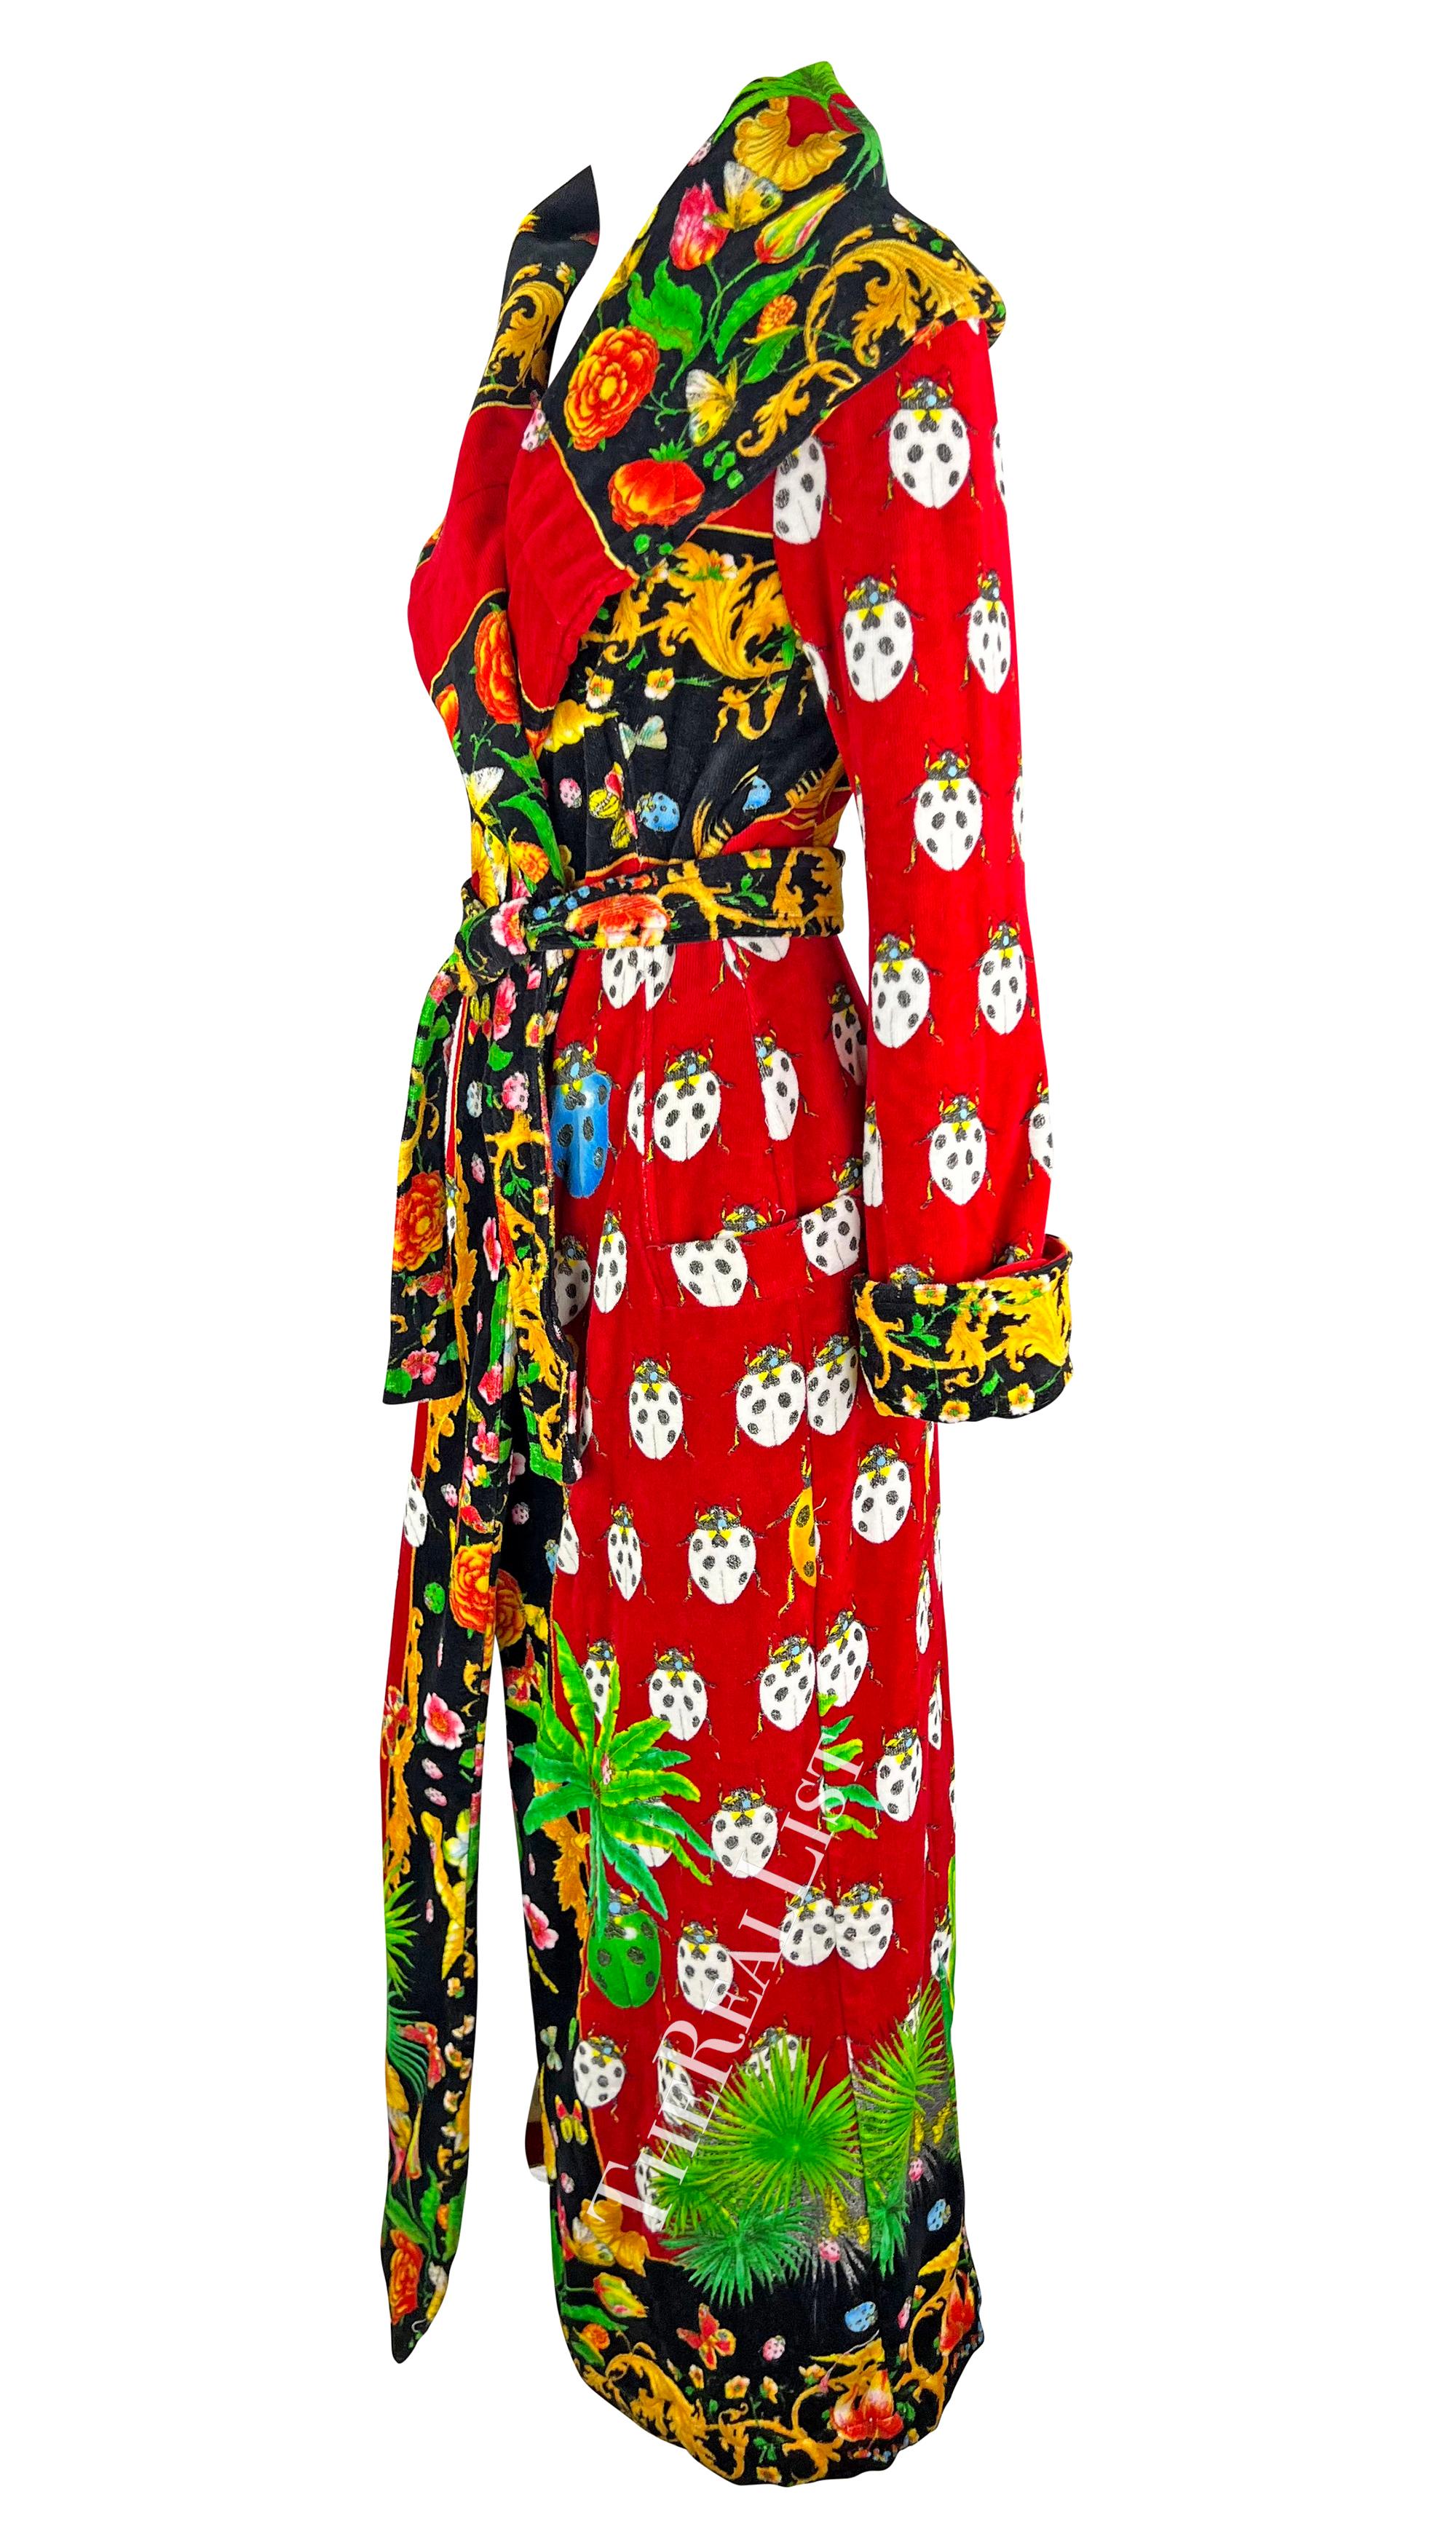 S/S 1995 Gianni Versace Red Lady Bug Print Corset Boned Terrycloth Robe For Sale 2